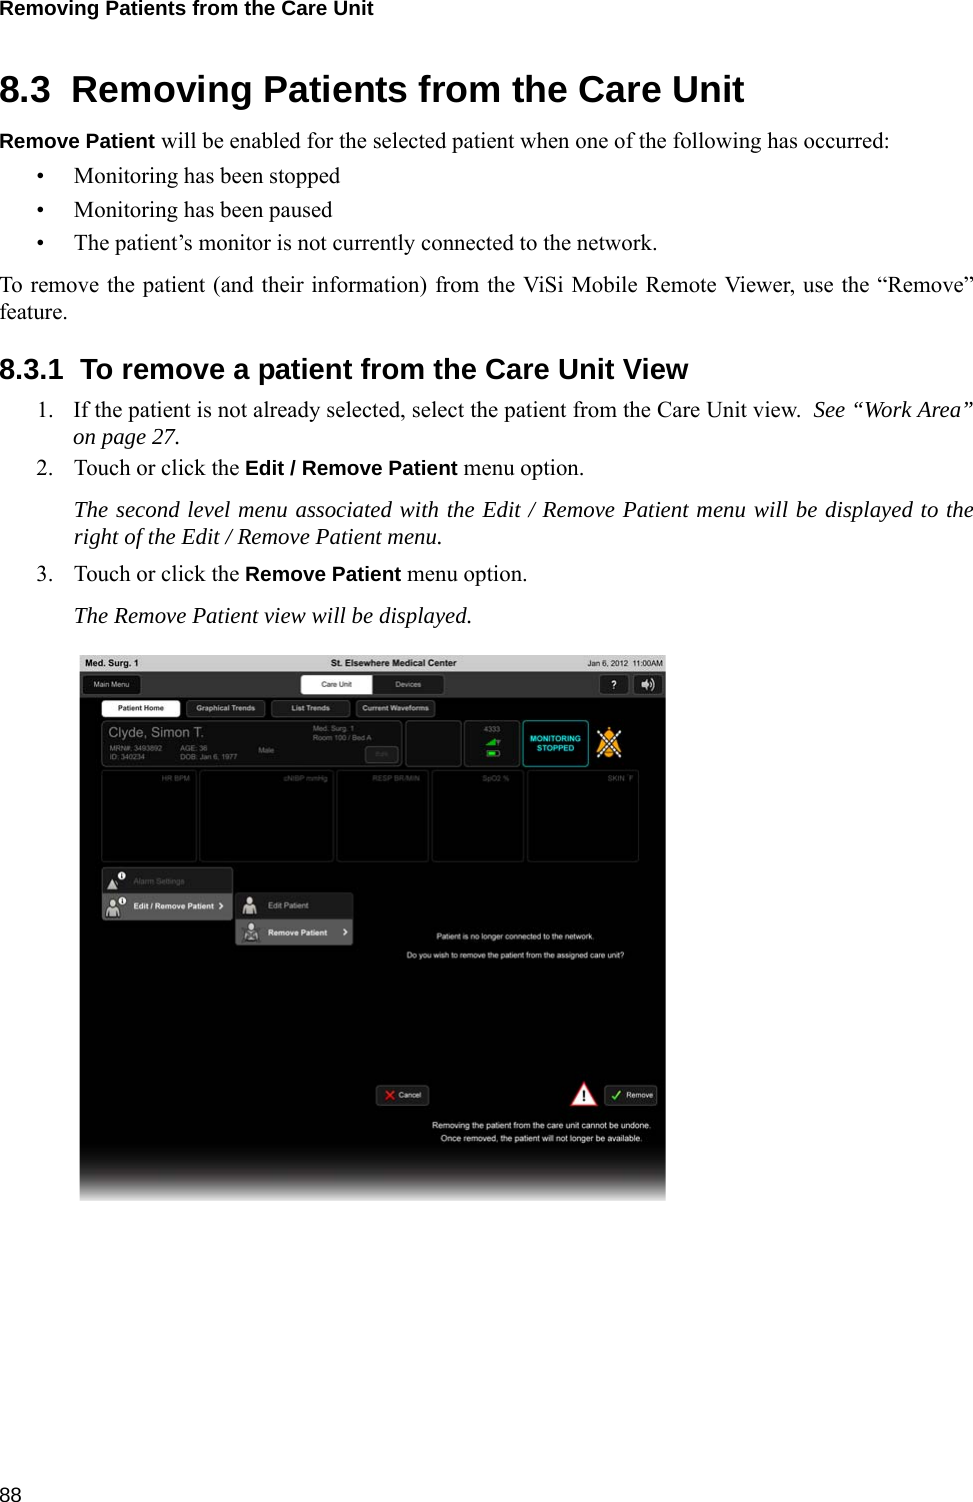 Removing Patients from the Care Unit 888.3  Removing Patients from the Care UnitRemove Patient will be enabled for the selected patient when one of the following has occurred:• Monitoring has been stopped• Monitoring has been paused• The patient’s monitor is not currently connected to the network.To remove the patient (and their information) from the ViSi Mobile Remote Viewer, use the “Remove”feature.8.3.1  To remove a patient from the Care Unit View1. If the patient is not already selected, select the patient from the Care Unit view.  See “Work Area”on page 27.2. Touch or click the Edit / Remove Patient menu option.  The second level menu associated with the Edit / Remove Patient menu will be displayed to theright of the Edit / Remove Patient menu.3. Touch or click the Remove Patient menu option.The Remove Patient view will be displayed.